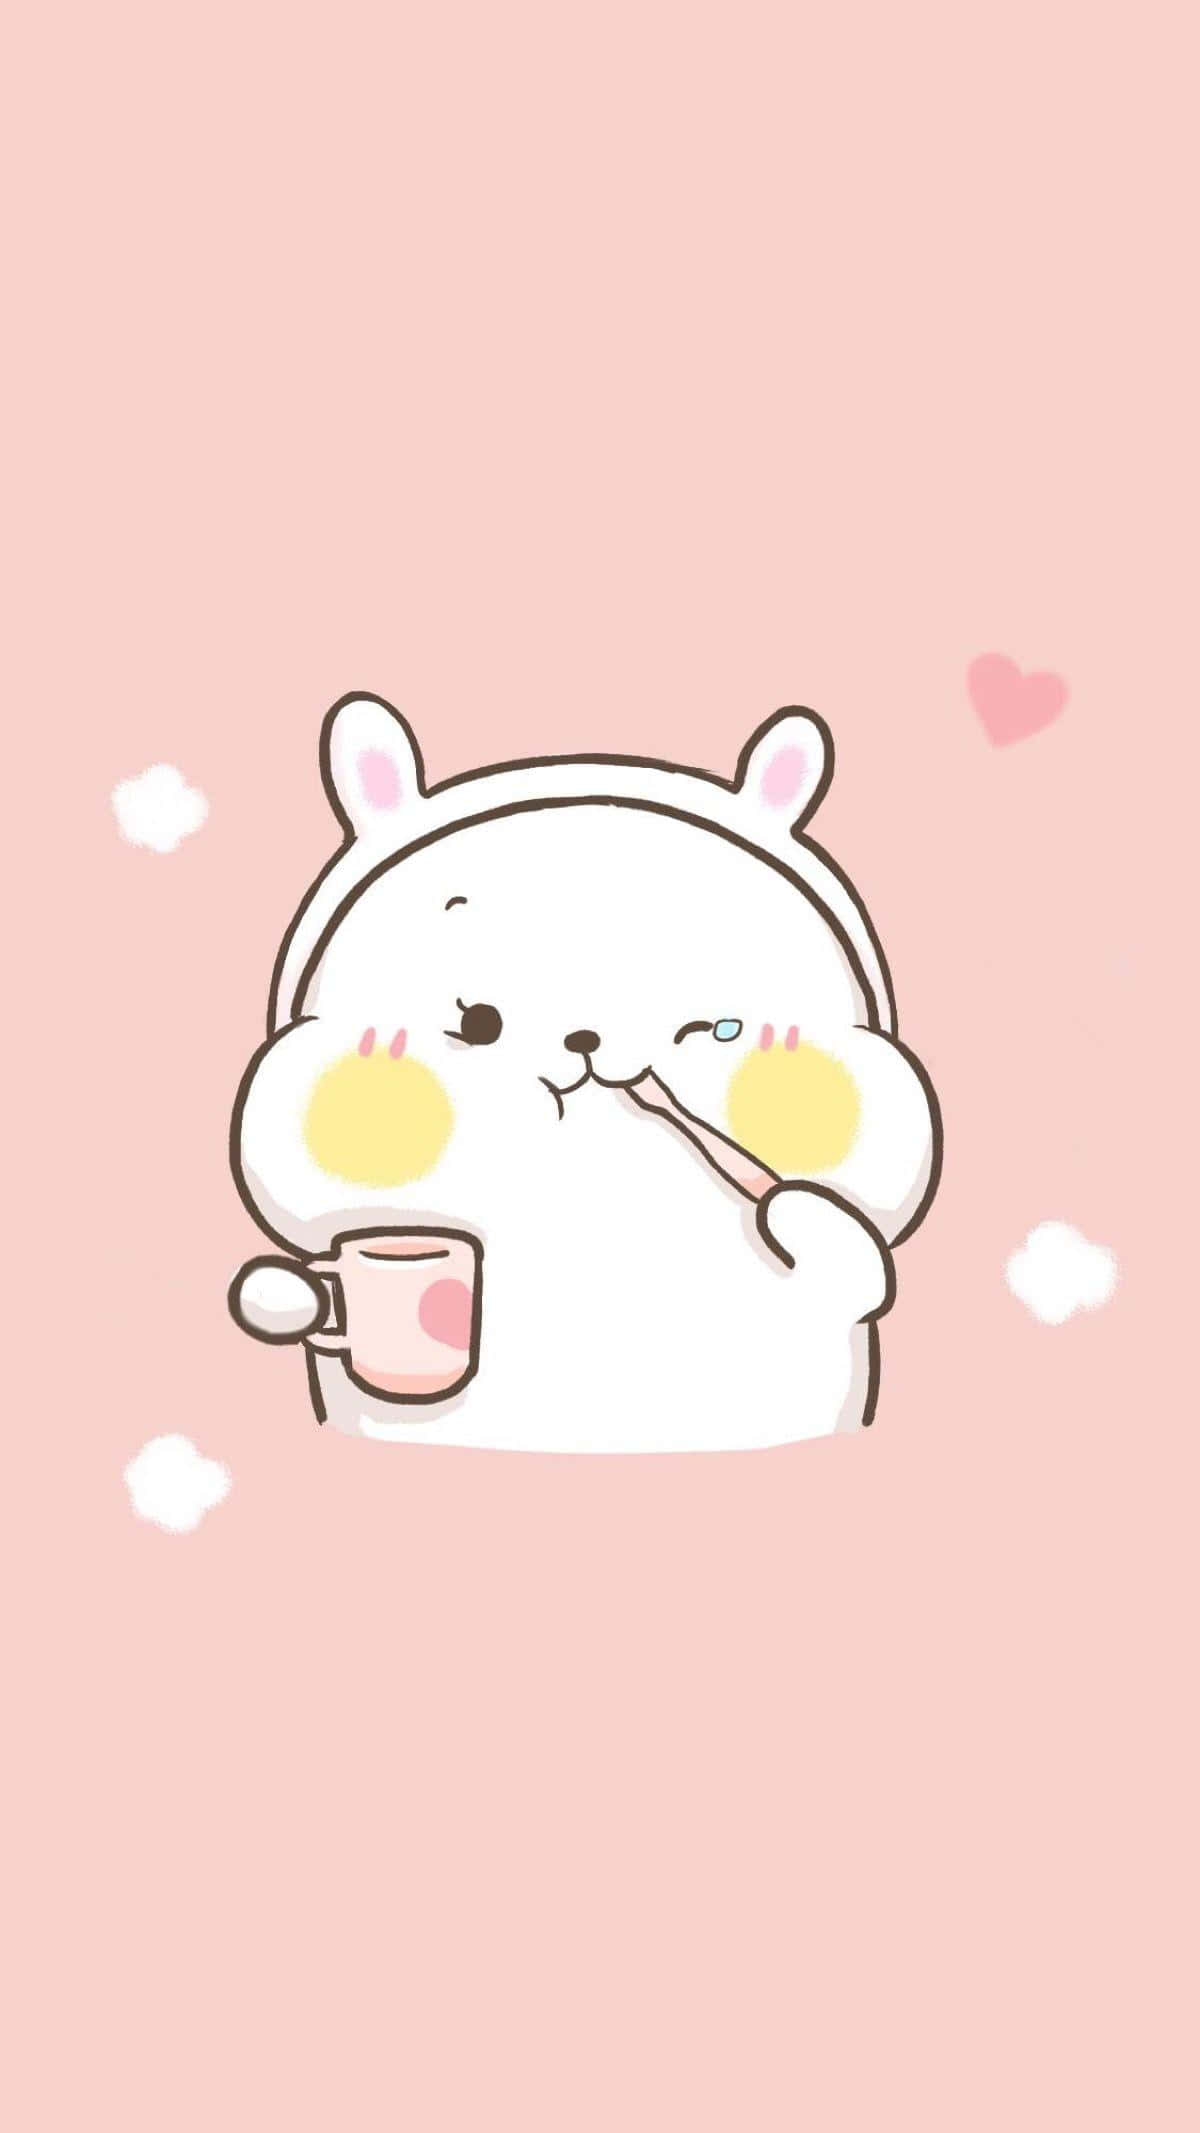 A Cute Kawaii Bunny With A Cup Of Coffee